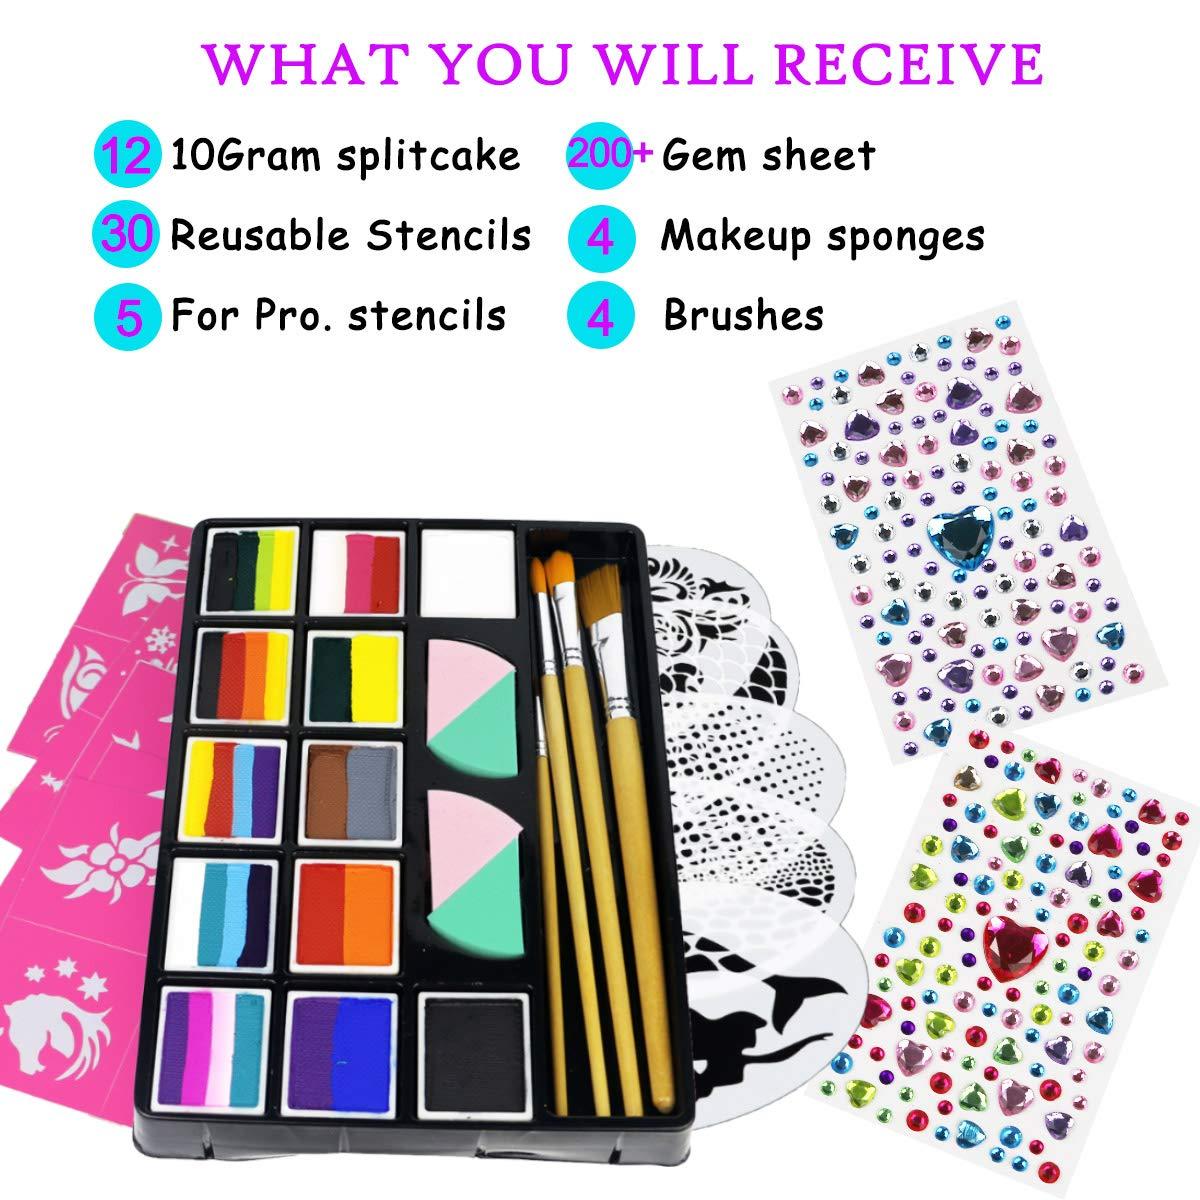 Create A Face Face Painting Kit for Kids Party - 12 Amazing Colors, Face  Paint Stencils, Makeup Brushes - Non-Toxic, Washable Facepaint Set fo